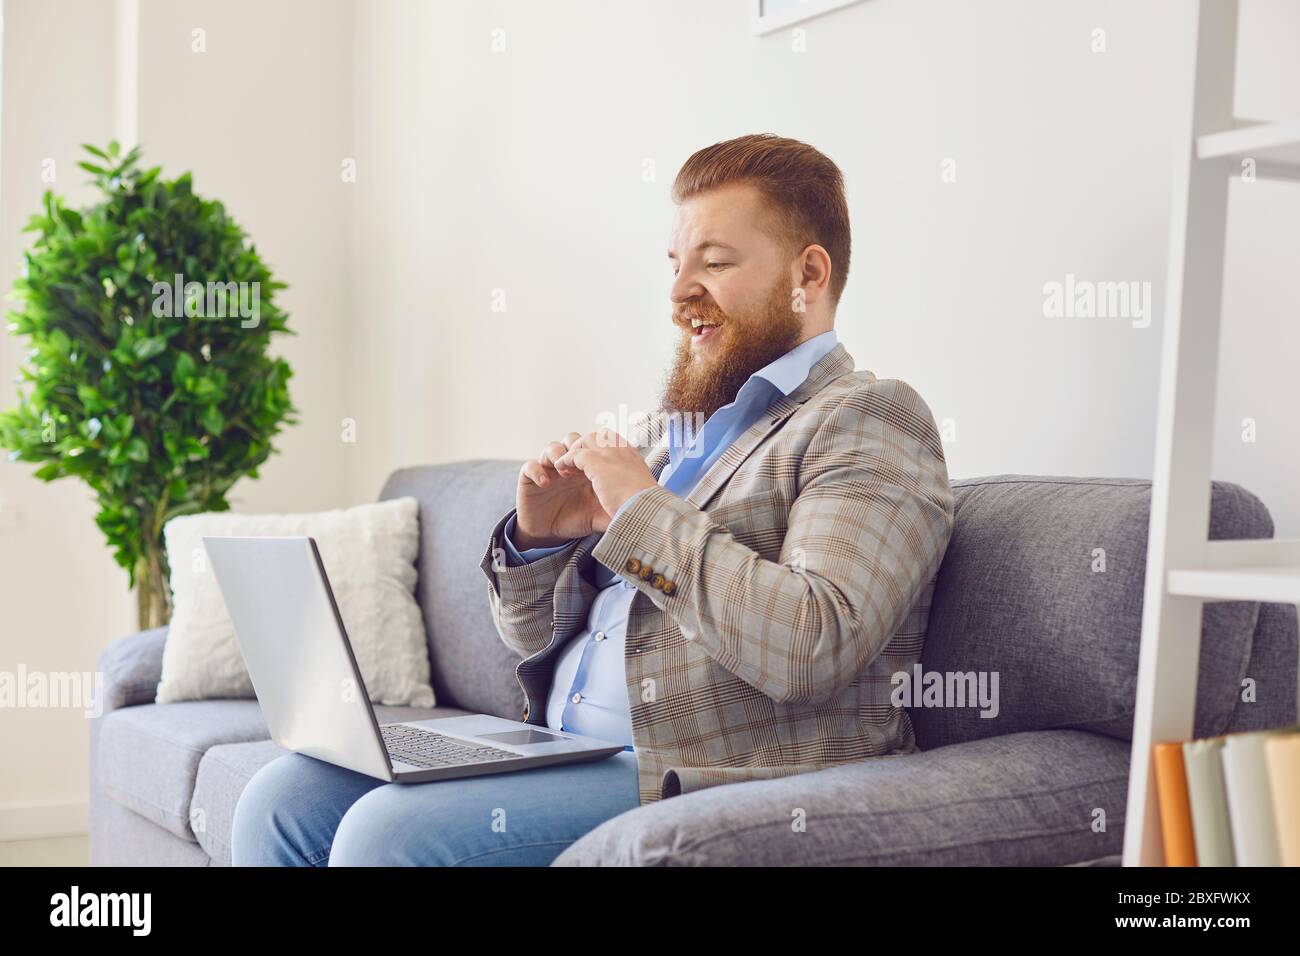 Video chat online. Delighted man talking on video chat via laptop at home Stock Photo